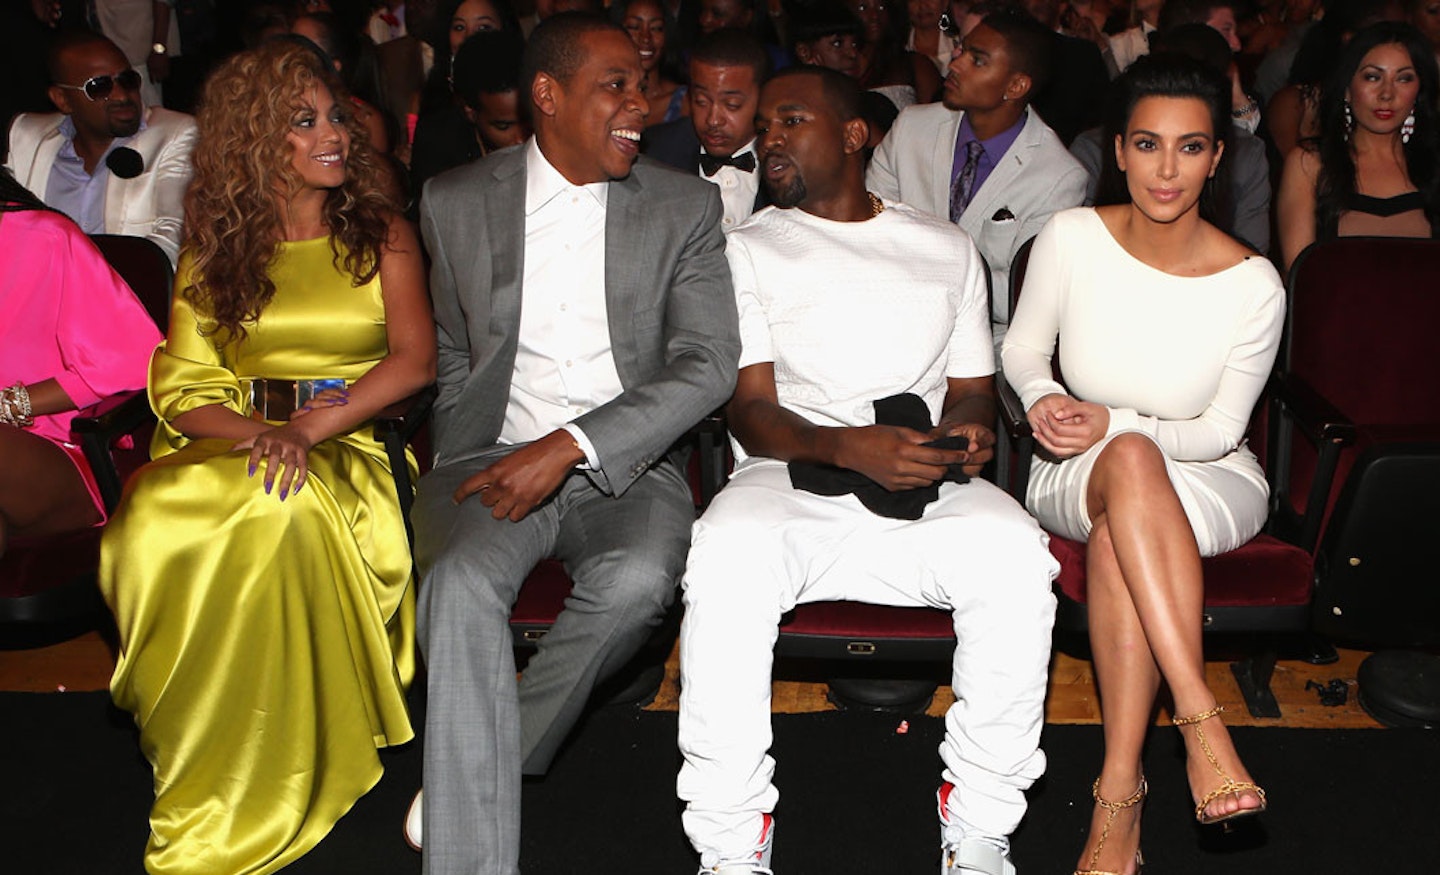 Back in the good old days - Beyonce, Jay-Z, Kanye and Kim at the 2012 BET Awards